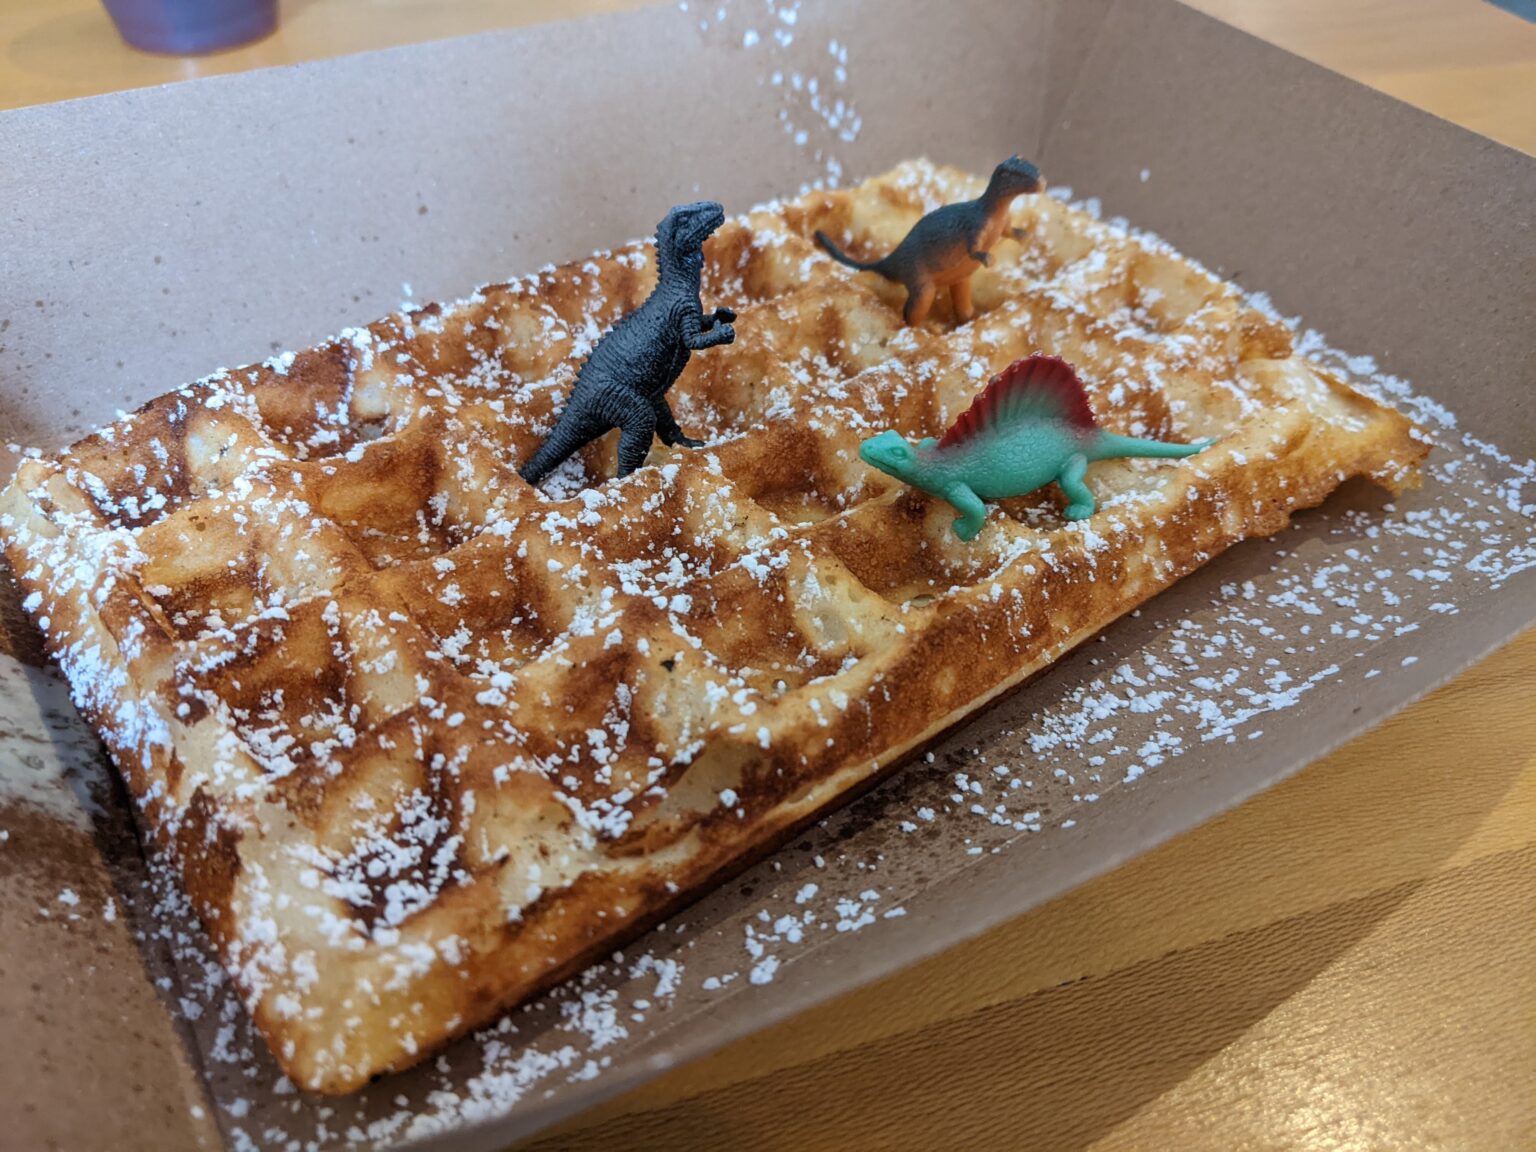 At Sweet As Waffles — a food truck located in Bellingham at Stemma Brewing — Home Base waffles act as the framework for a variety of menu items both sweet and savory. The simple cake is the rock upon which Sweet As Waffles builds its culinary creations.